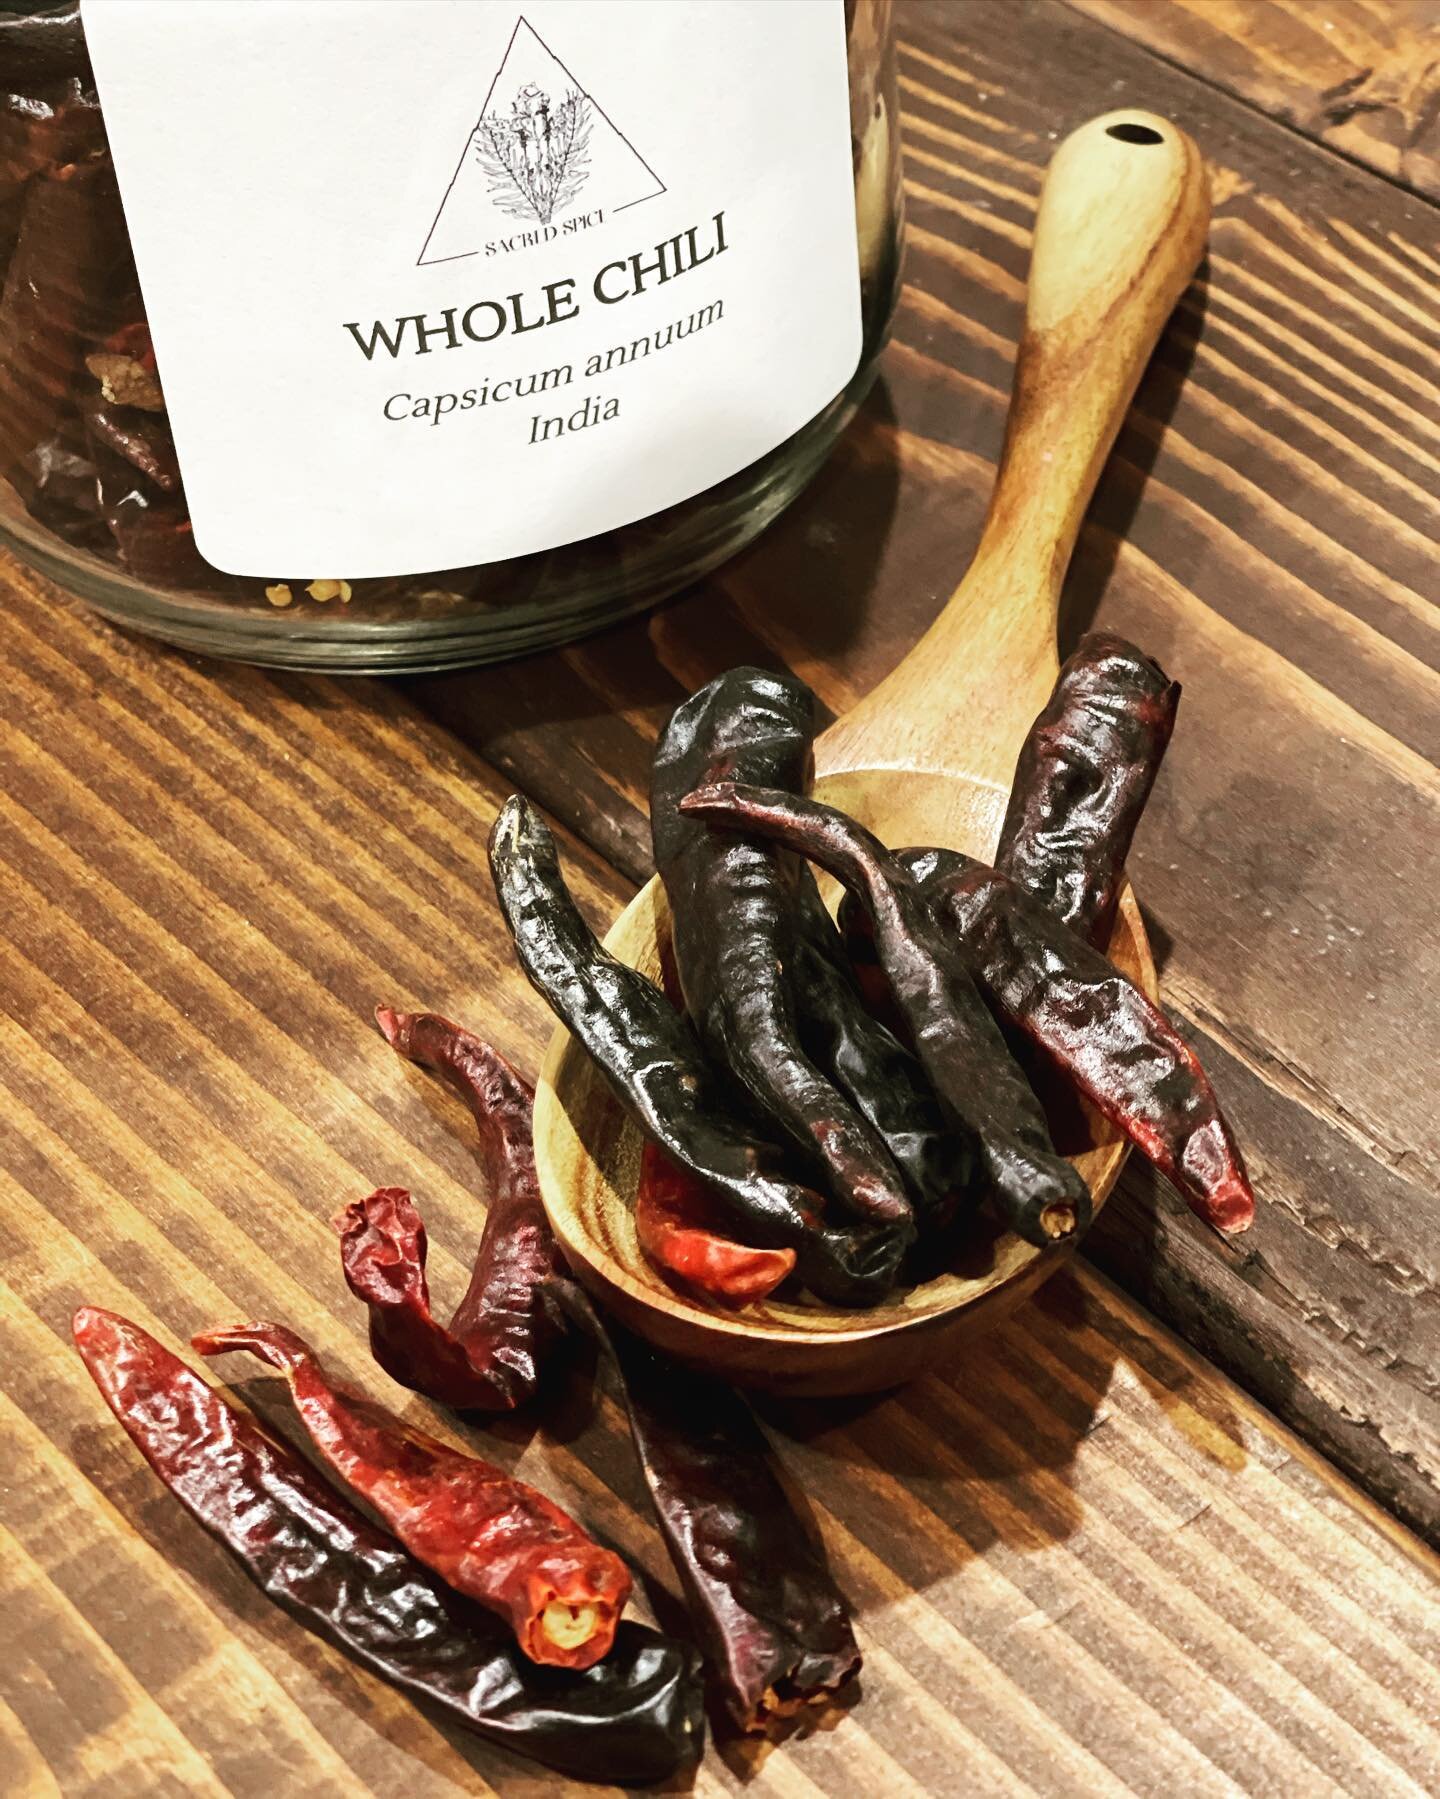 Whole Chilies 🌶 #sacredspicebk 
.
.
Delicious in all your sauces and stews!🌶&hearts;️
.
.
#chilies #chilis🌶 #chilipeppers #wholechili #spiceshop #spiceapothecary #apothecary #blackownedbrooklyn